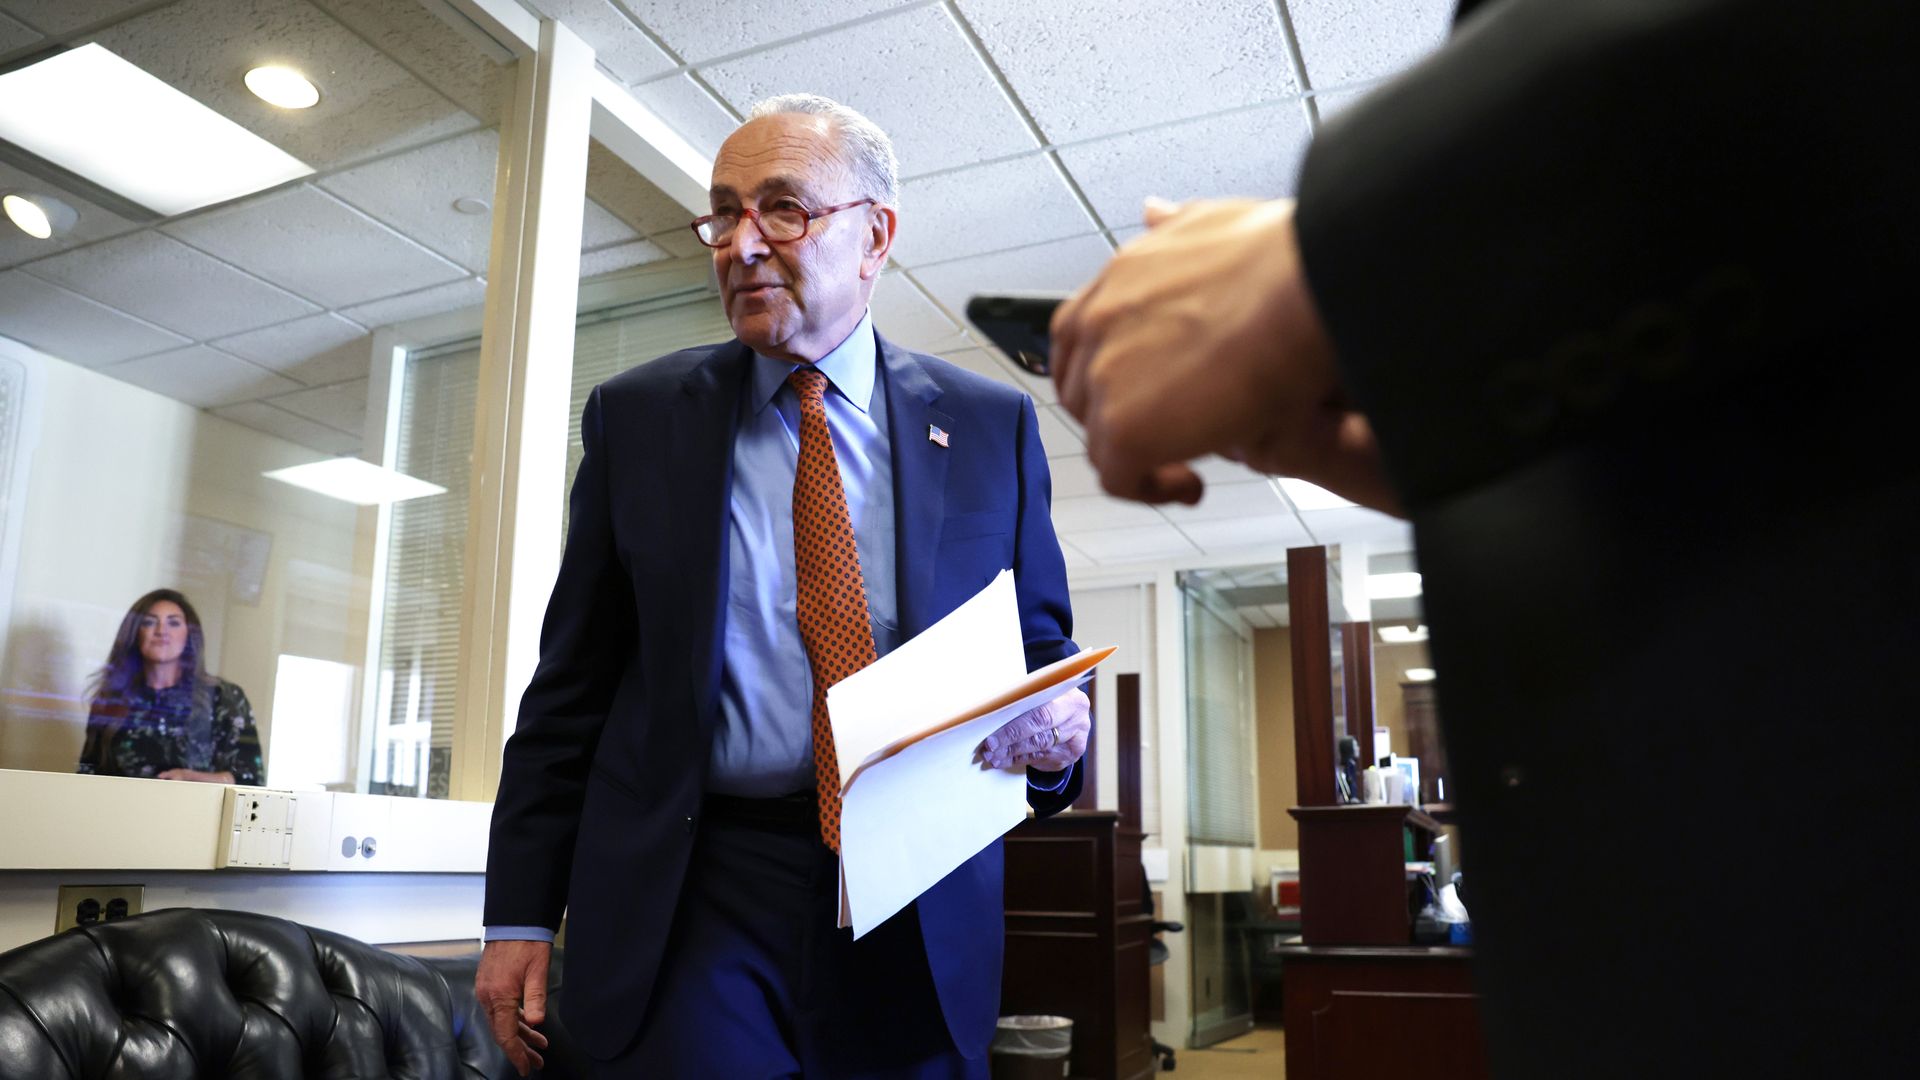 Senate Majority Leader Chuck Schumer, wearing a blue suit, light blue shirt, rust tie and glasses, holding sheets of paper as he walks to a press conference.